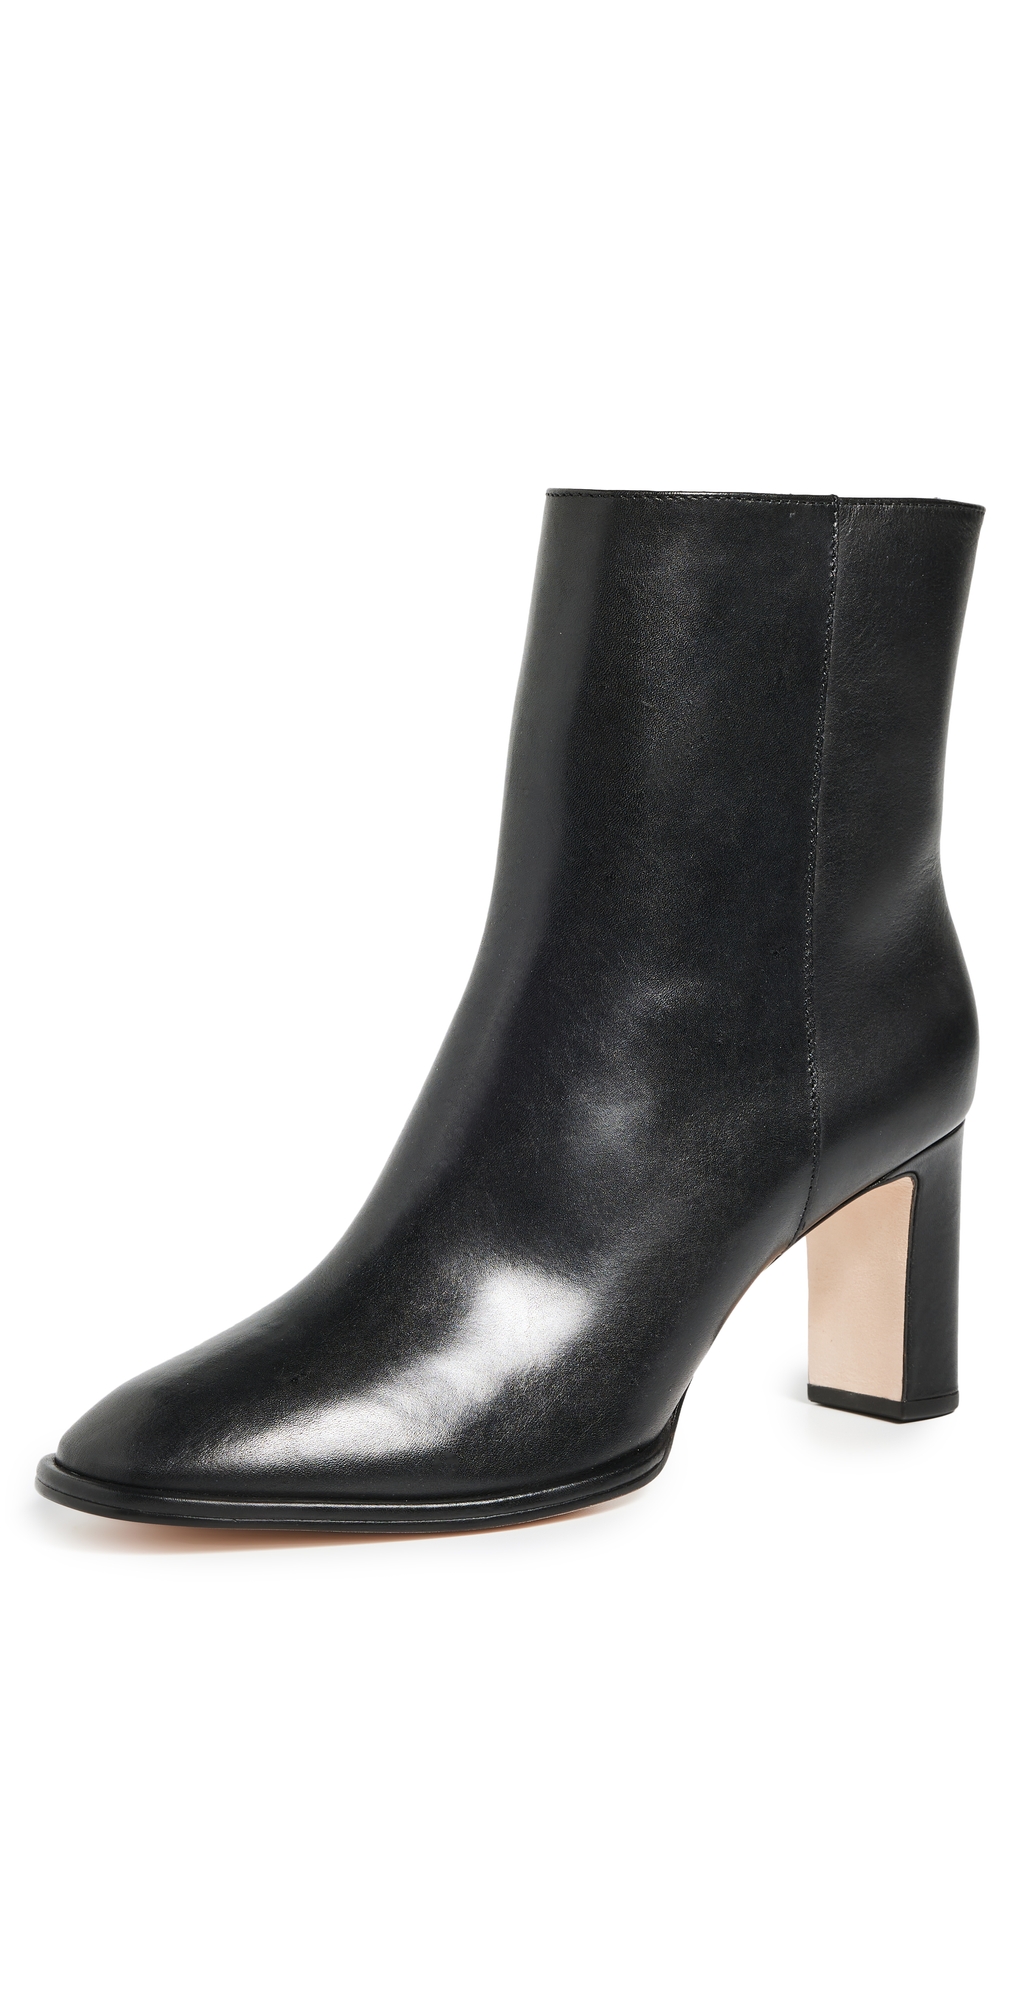 Buy Reformation Gillian Boots Shoes Online | Shoes Trove